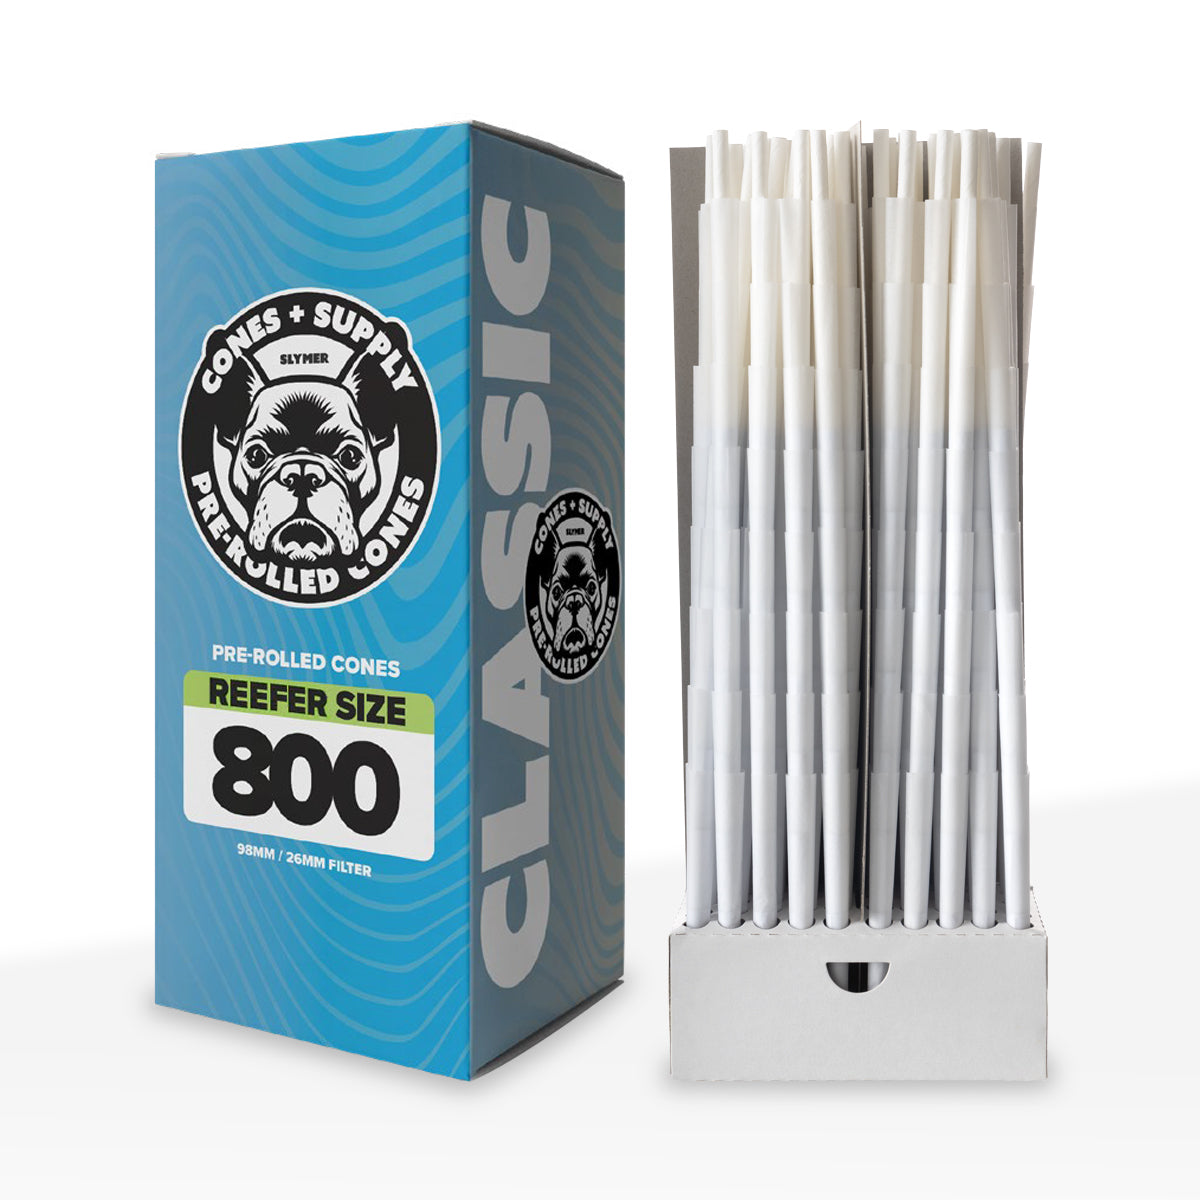 CONES + SUPPLY | Reefer Pre-rolled Cones | 98mm  - Various Styles - 800 Count